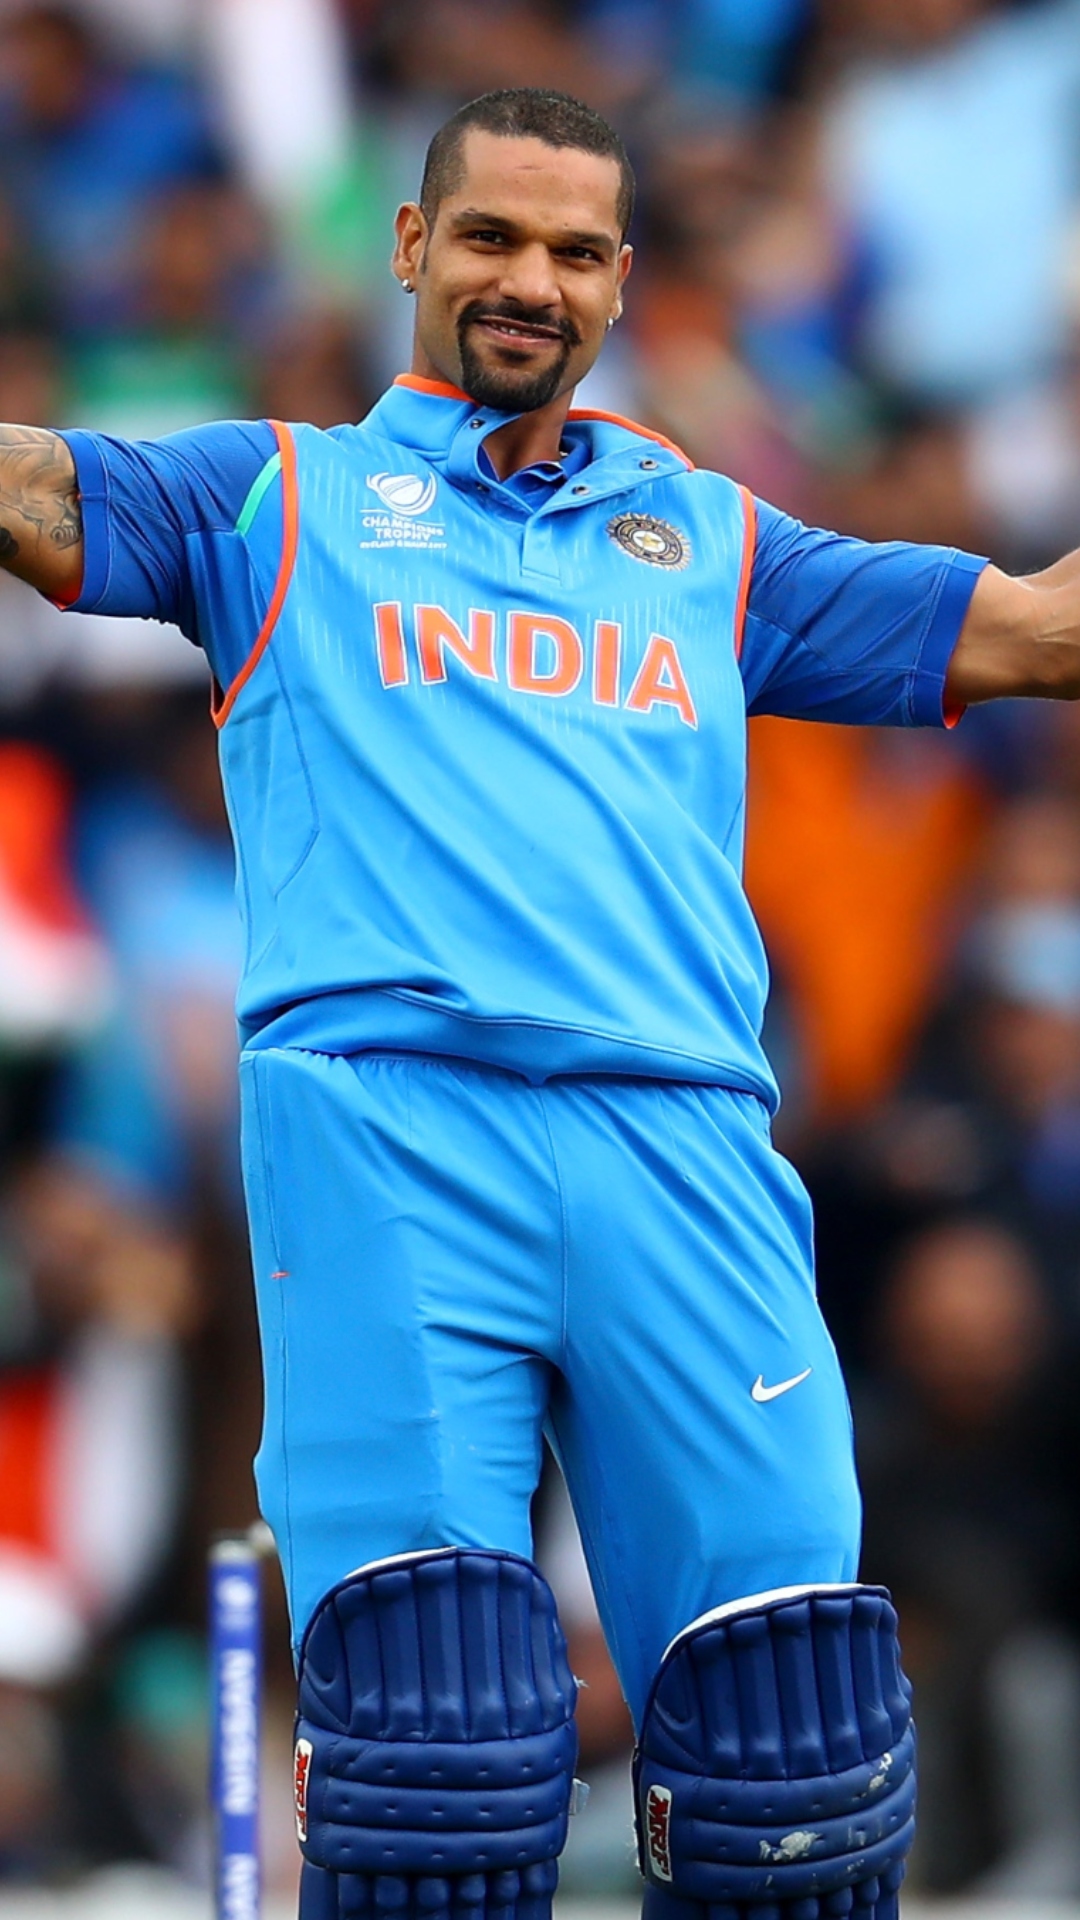 Shikar Dhawan's record in ICC tournaments and Asia Cup, how to know the data?